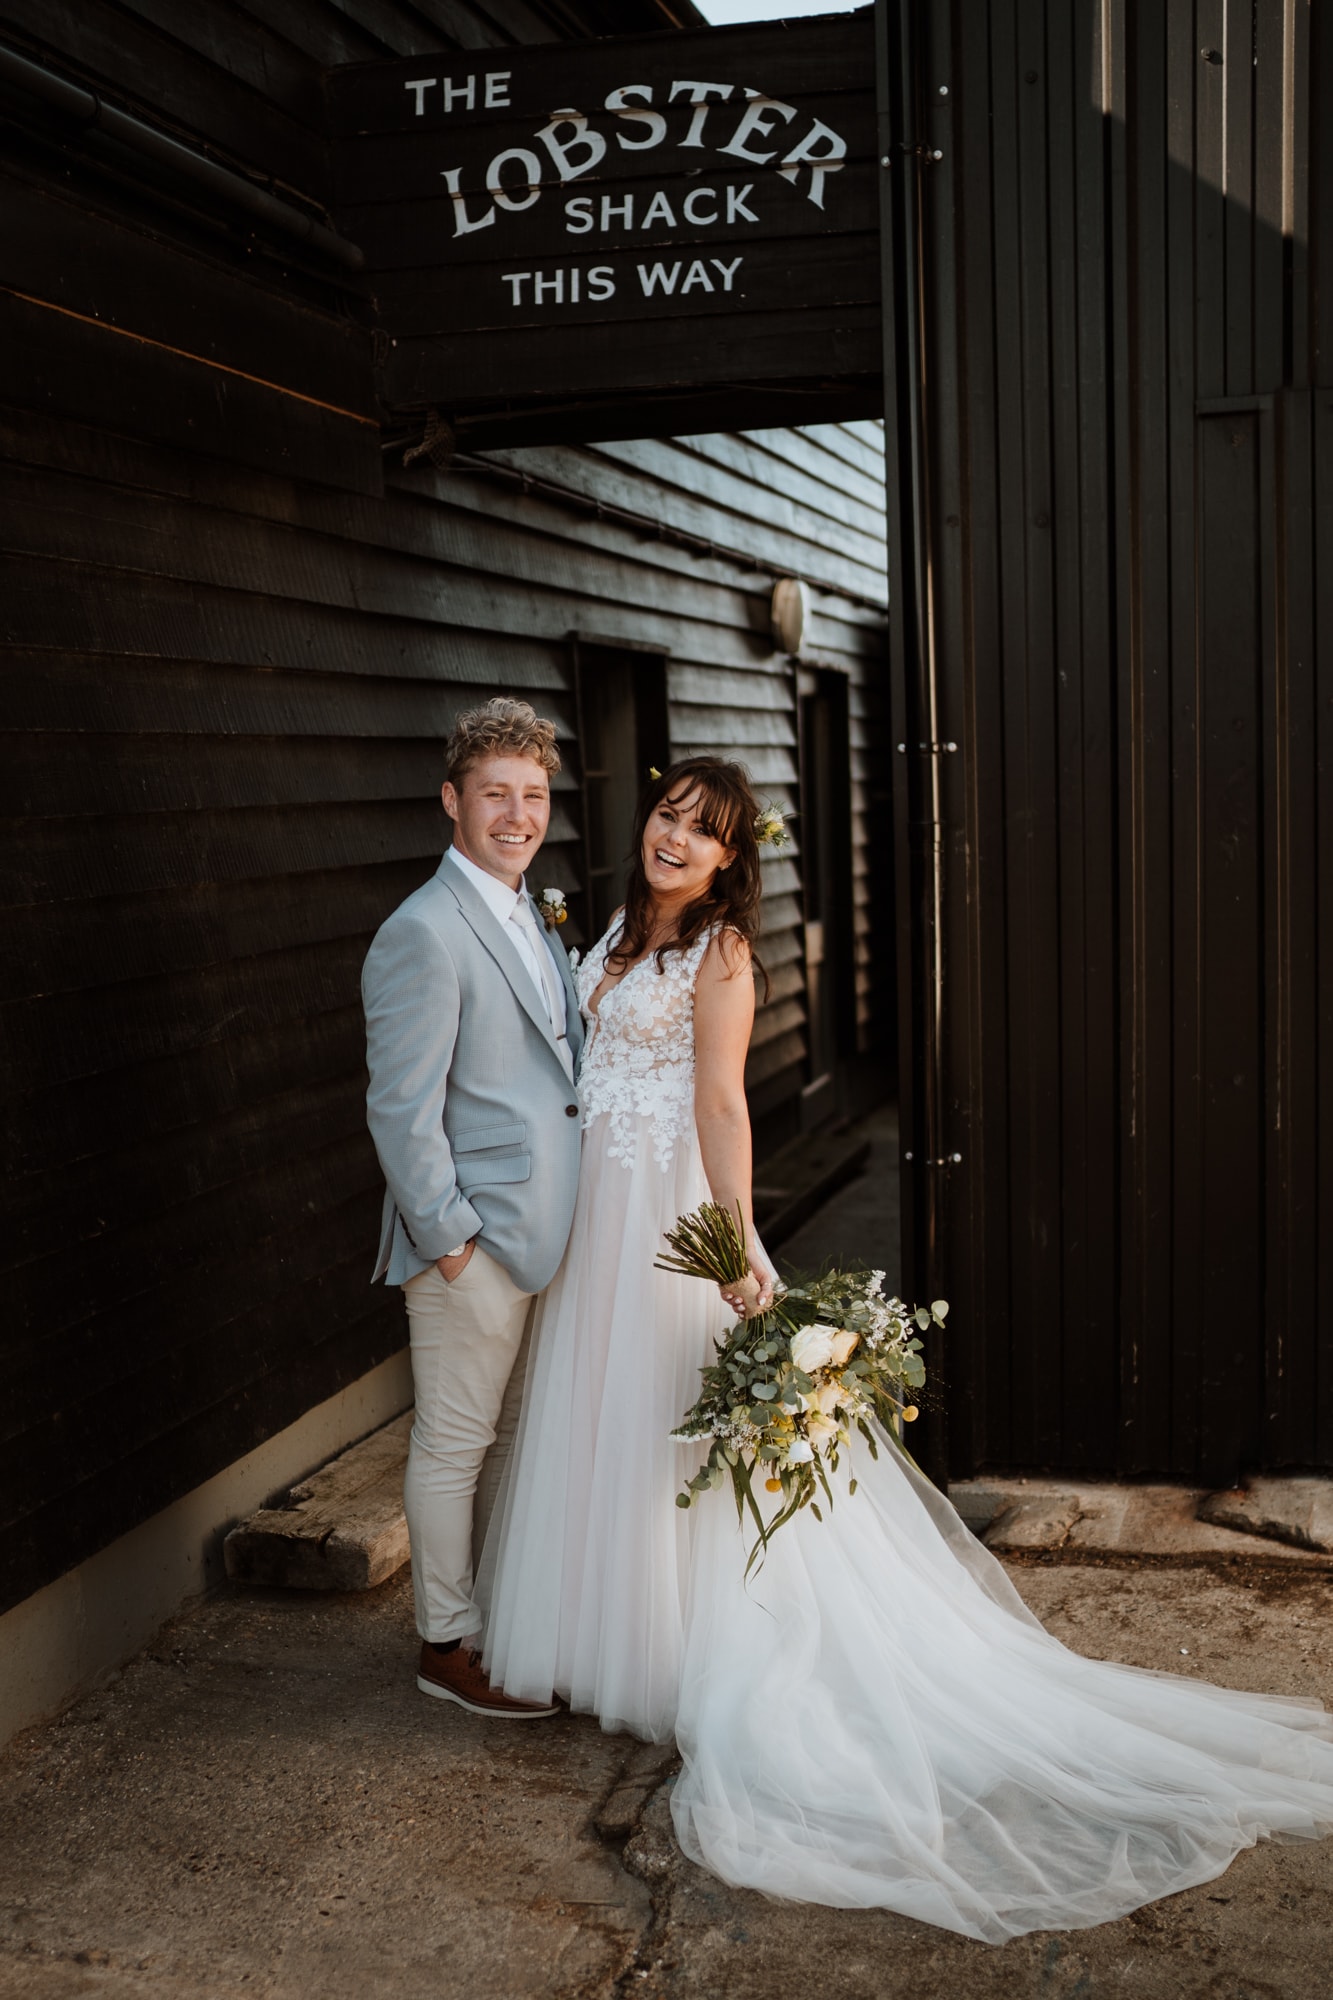 Stunning bride and groom laughing and looking relaxed under a sign for the lobster shack at East Quay wedding venue